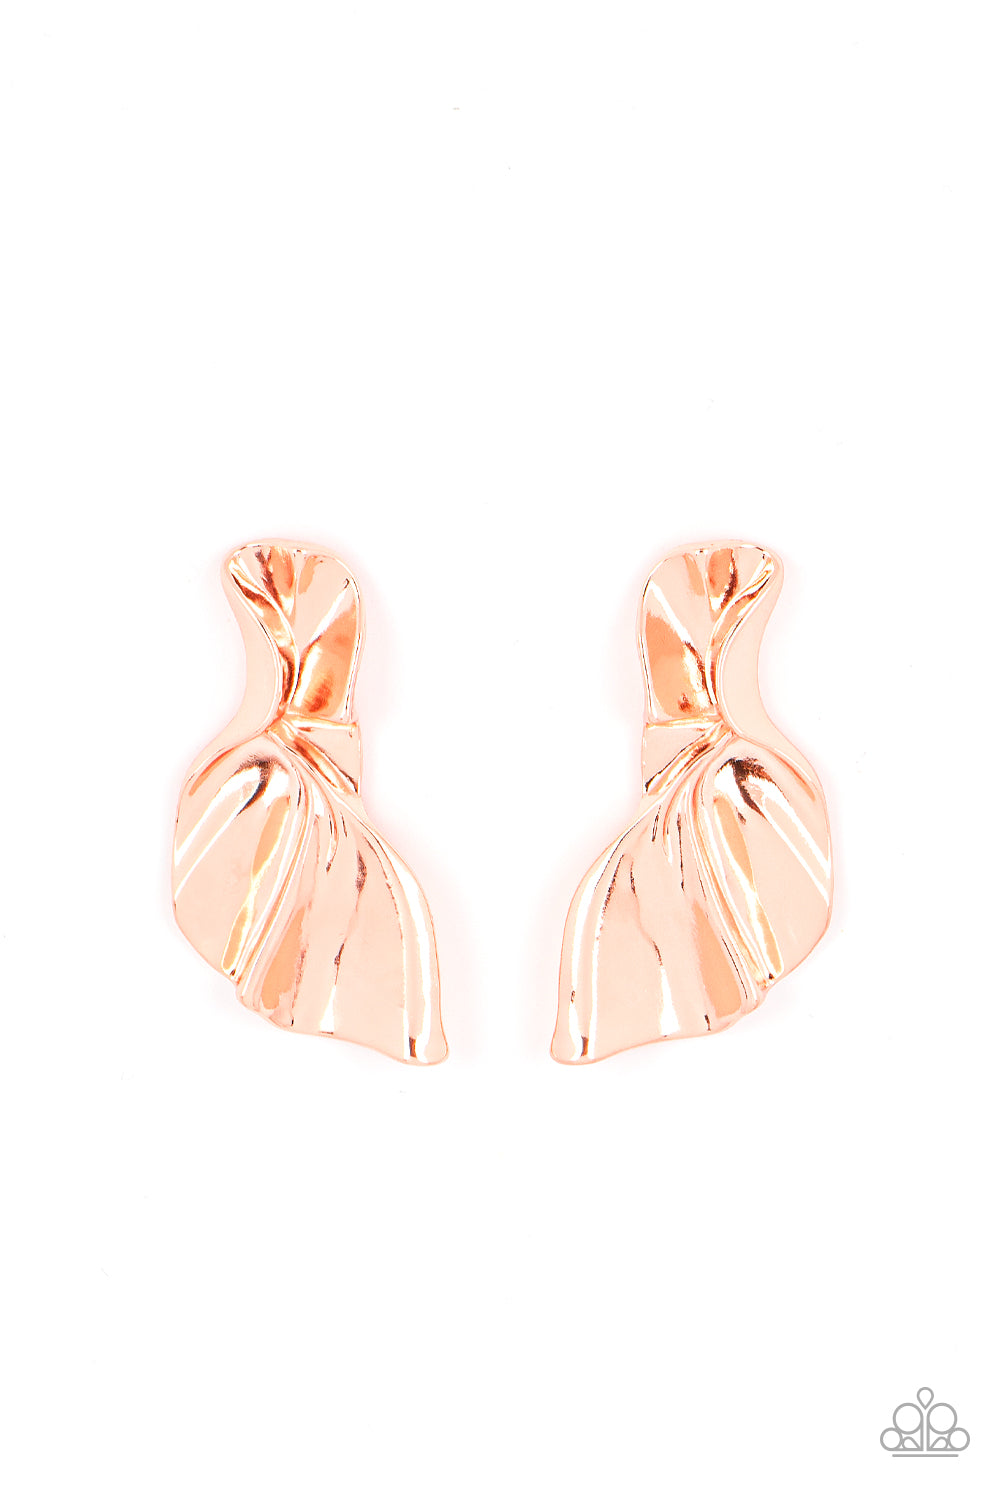 Paparazzi - METAL-Physical Mood - Copper Earrings PREORDER - Alies Bling Bar